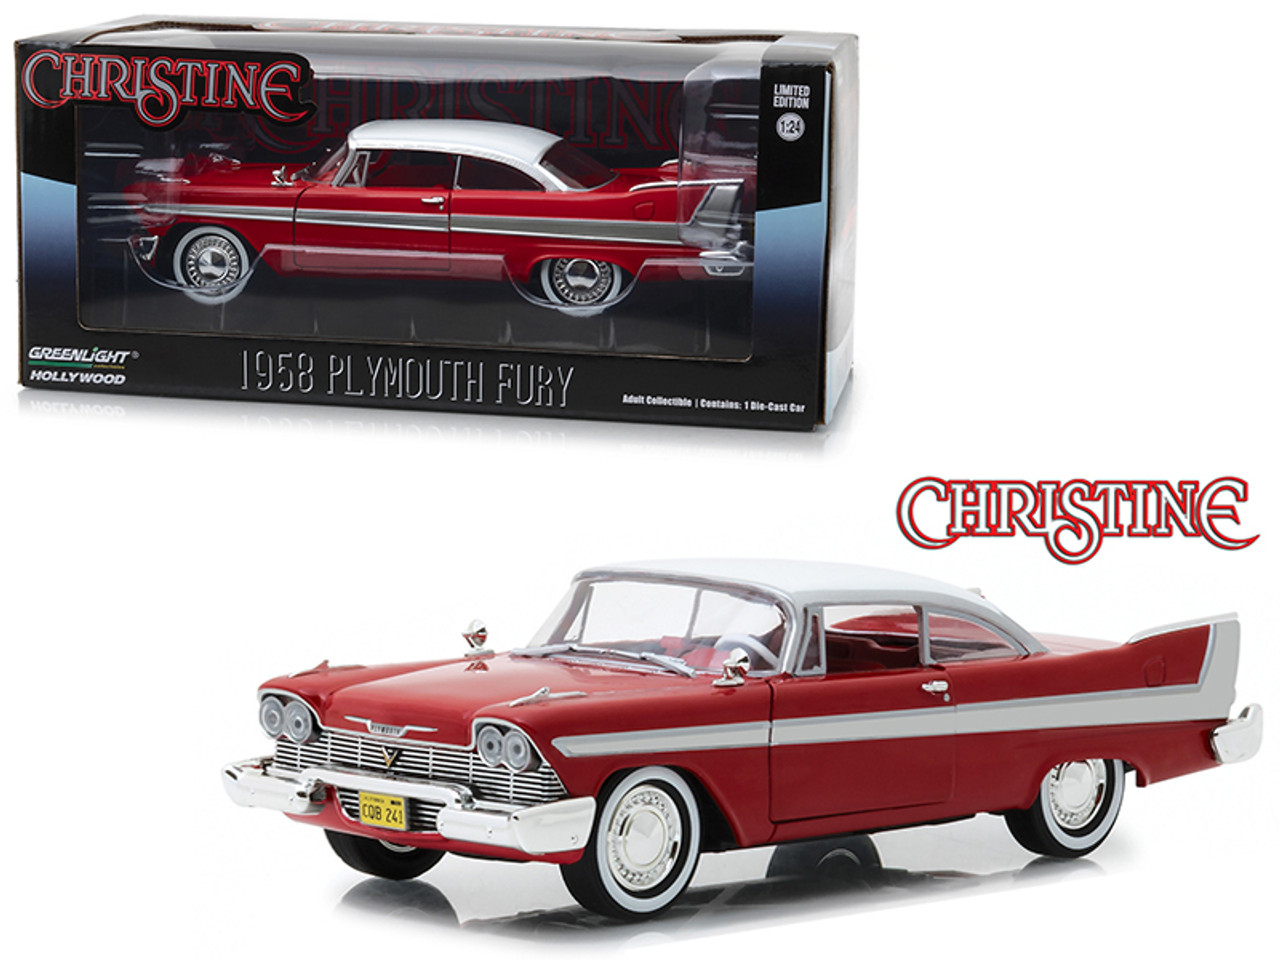 1/24 Greenlight 1958 Plymouth Fury Red with White Top "Christine" (1983) Movie Diecast Car Model